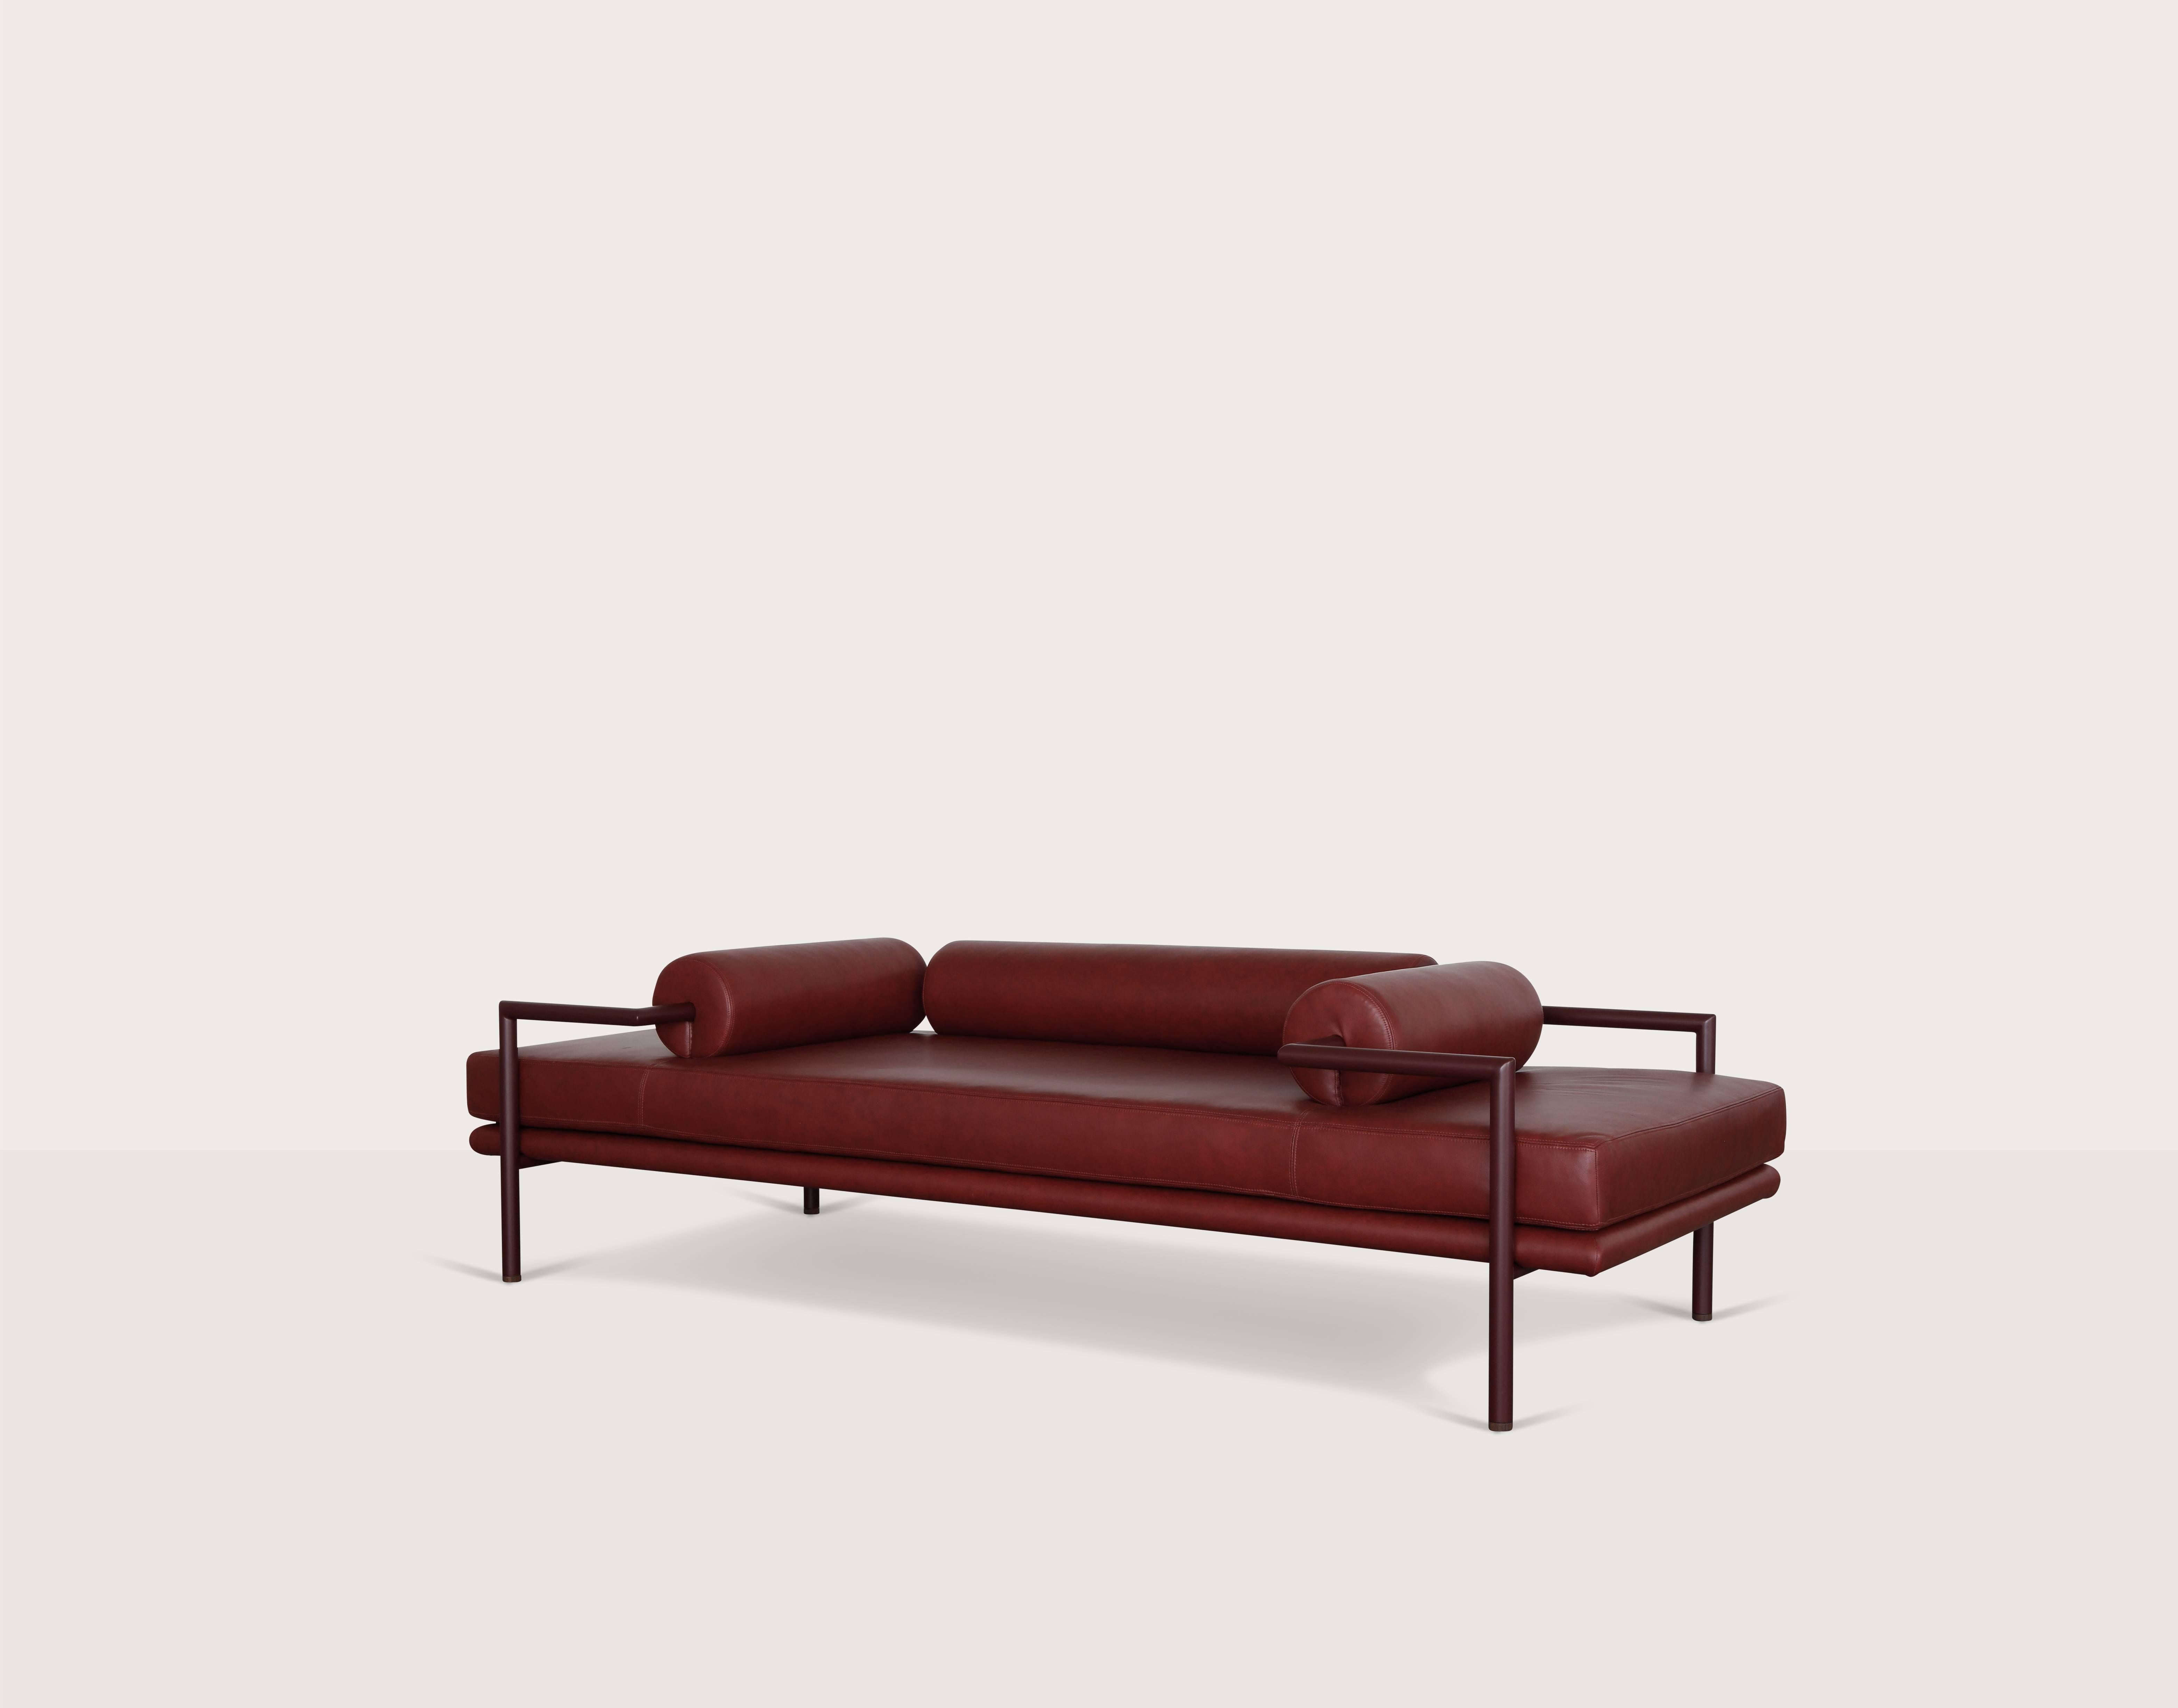 Inspired by the architecture of Luis Barragán, the Dorcia is a unique piece that focuses on form and function. The bolsters serve as head rests, armrests or low backrests that divide the daybed into central seating for two and individual seating on